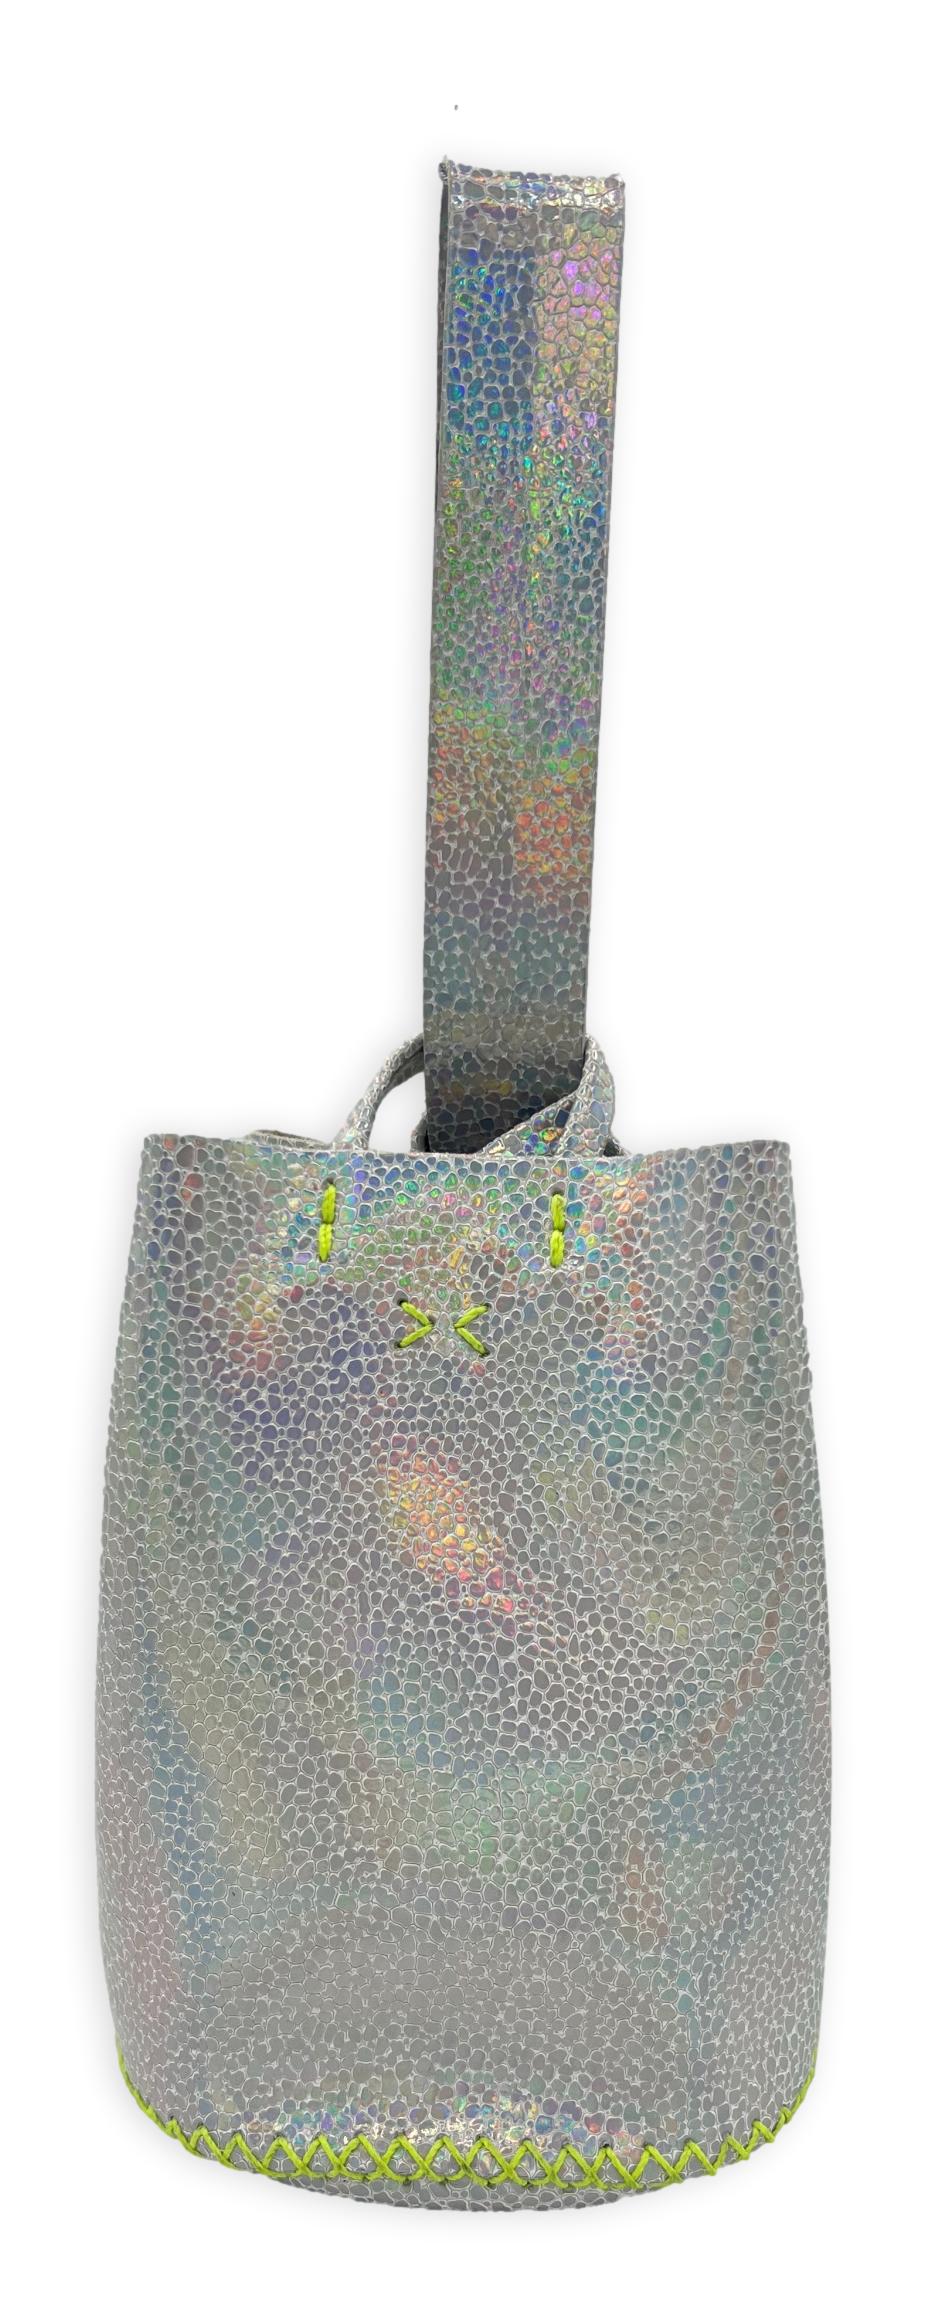 navigli bag | holographic upcycled leather with neon stitches